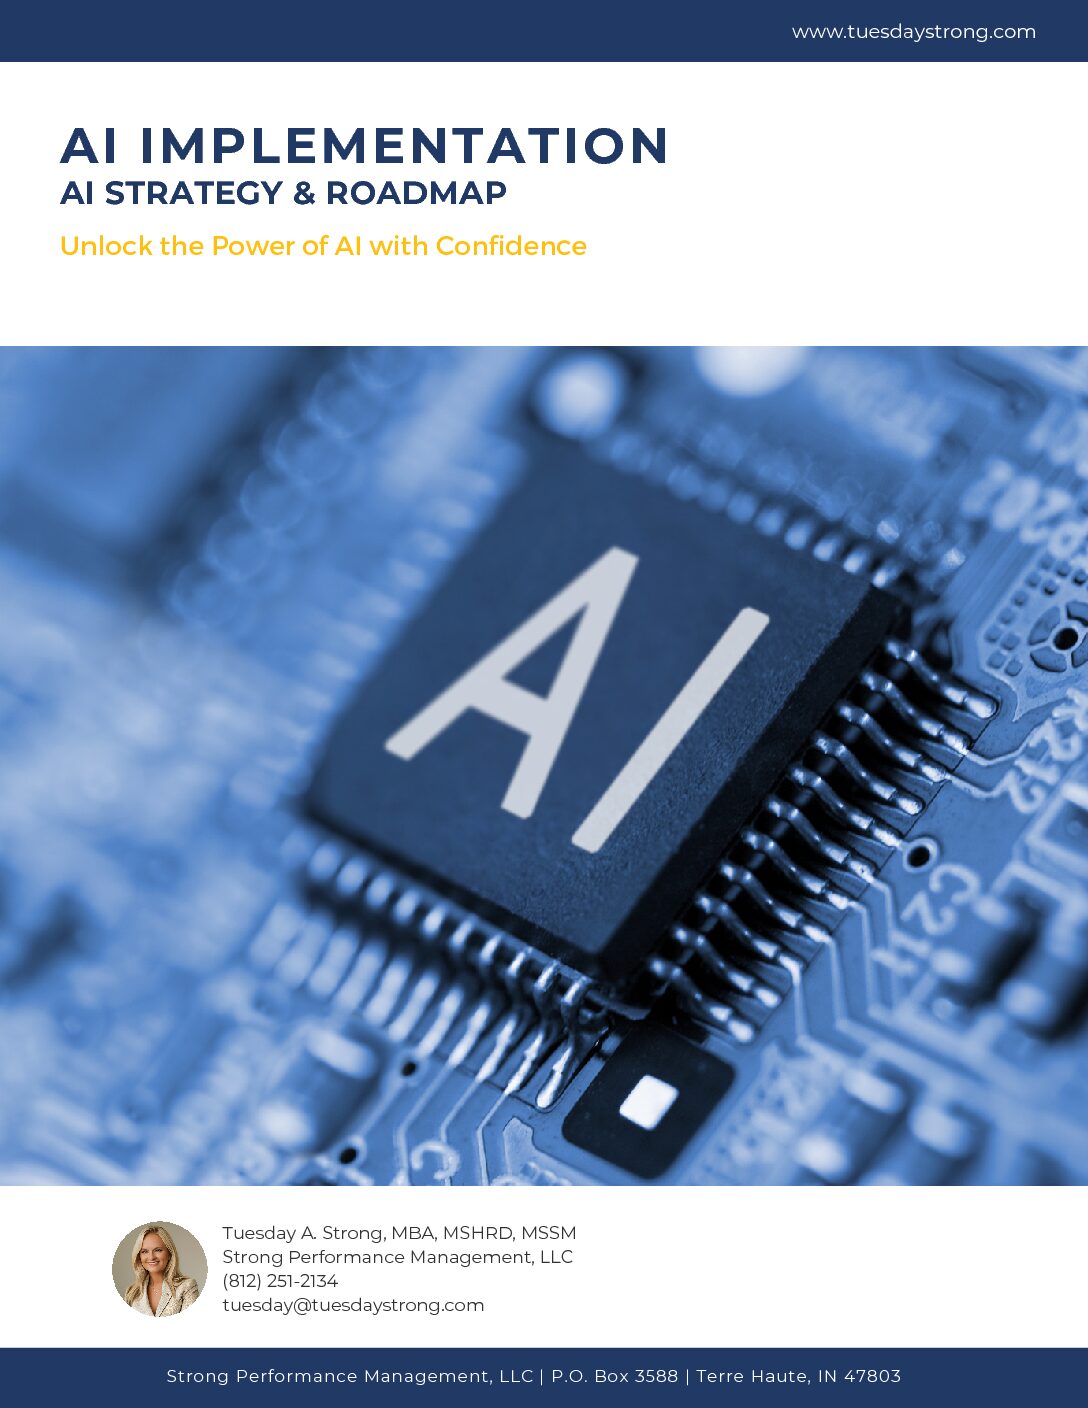 AI Implementation - AI Strategy & Roadmap: Guide and Template